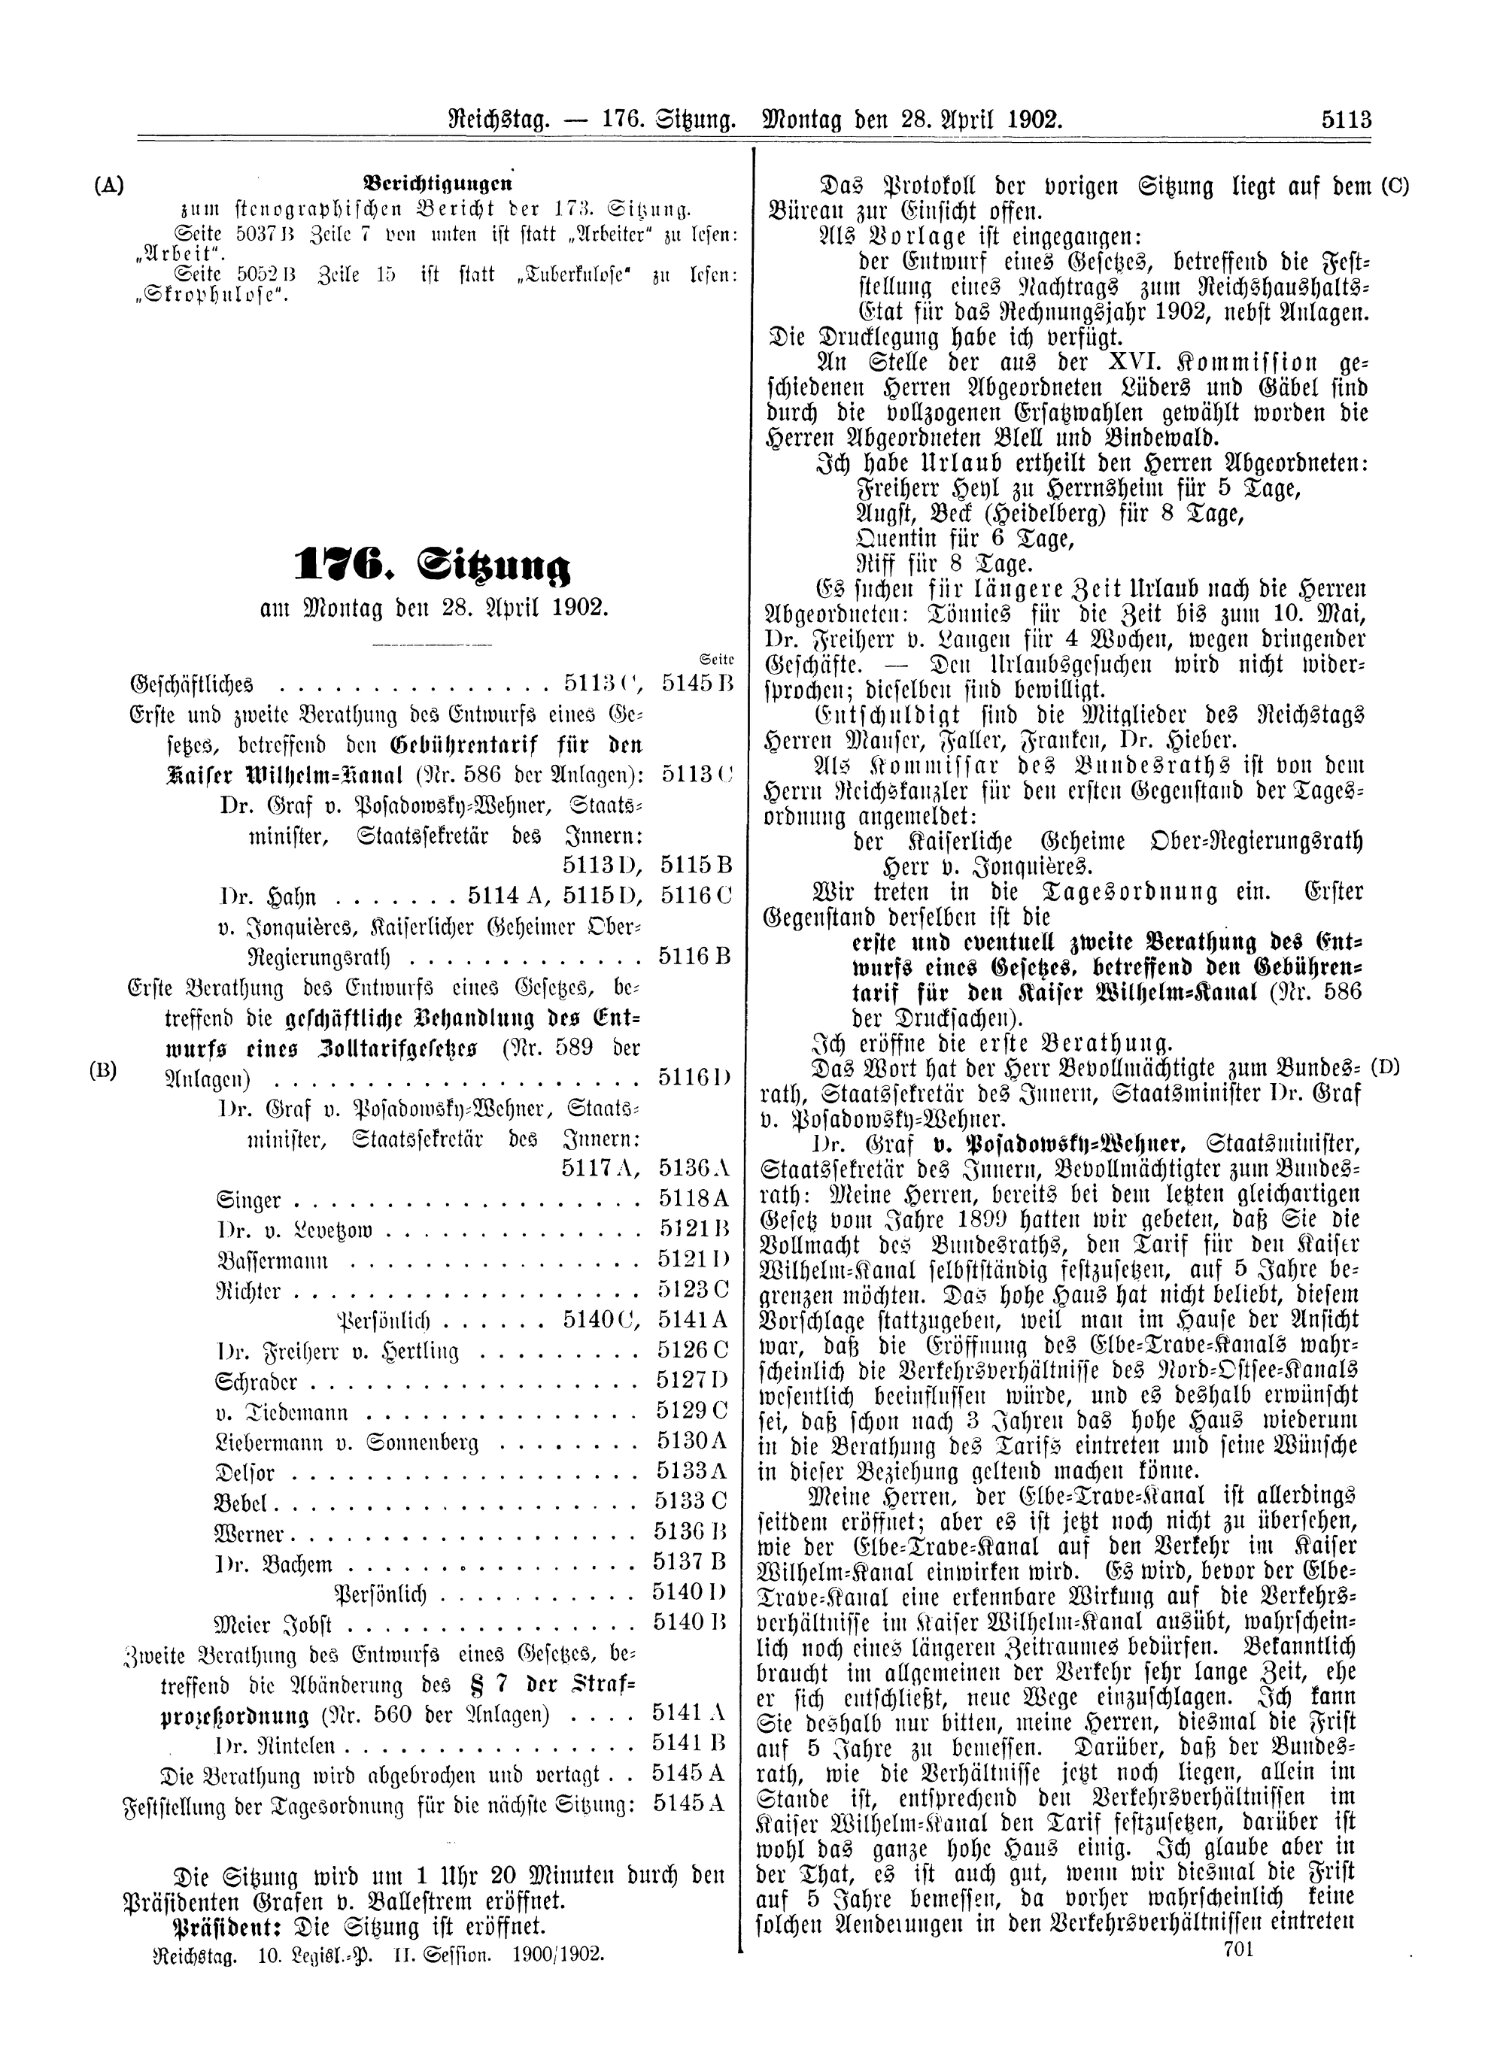 Scan of page 5113